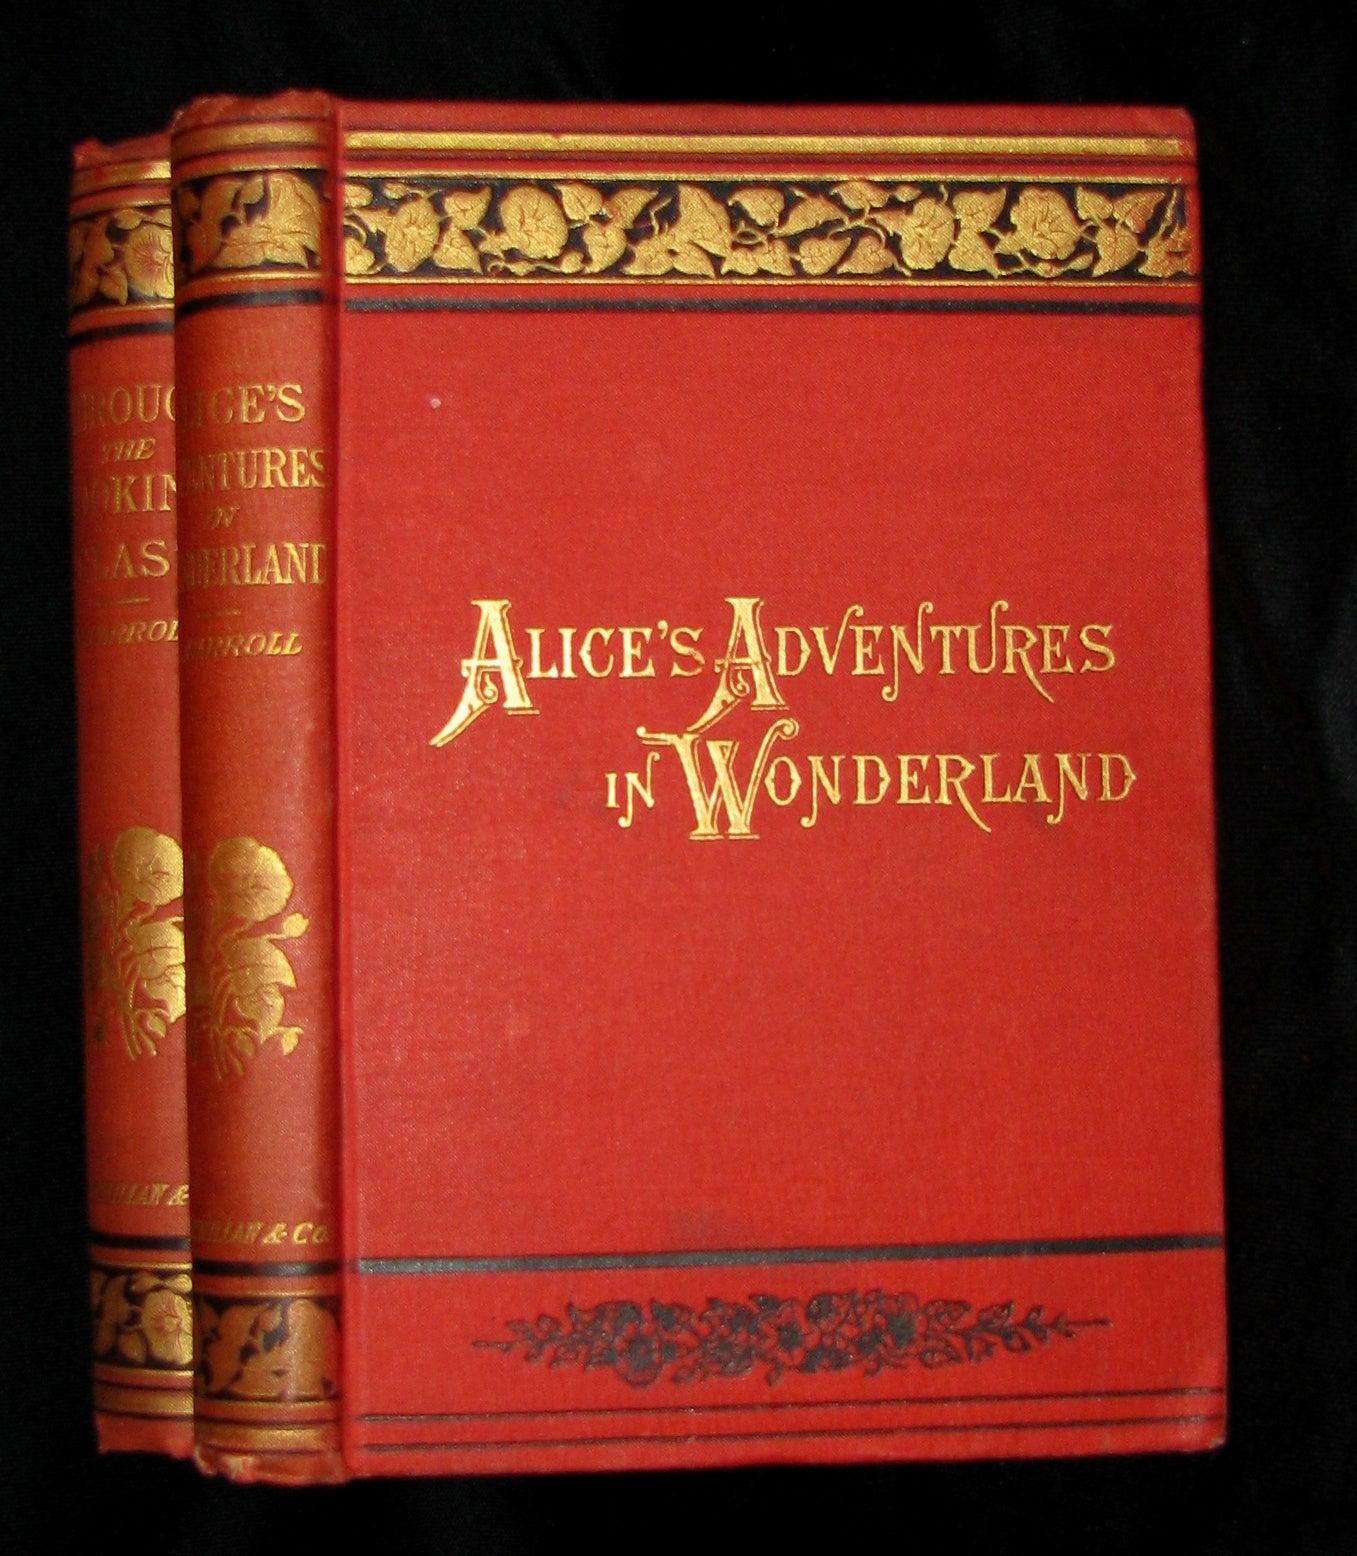 1889 Rare Victorian Bookset - Alice's Adventures in Wonderland & Through the Looking-Glass L Carroll